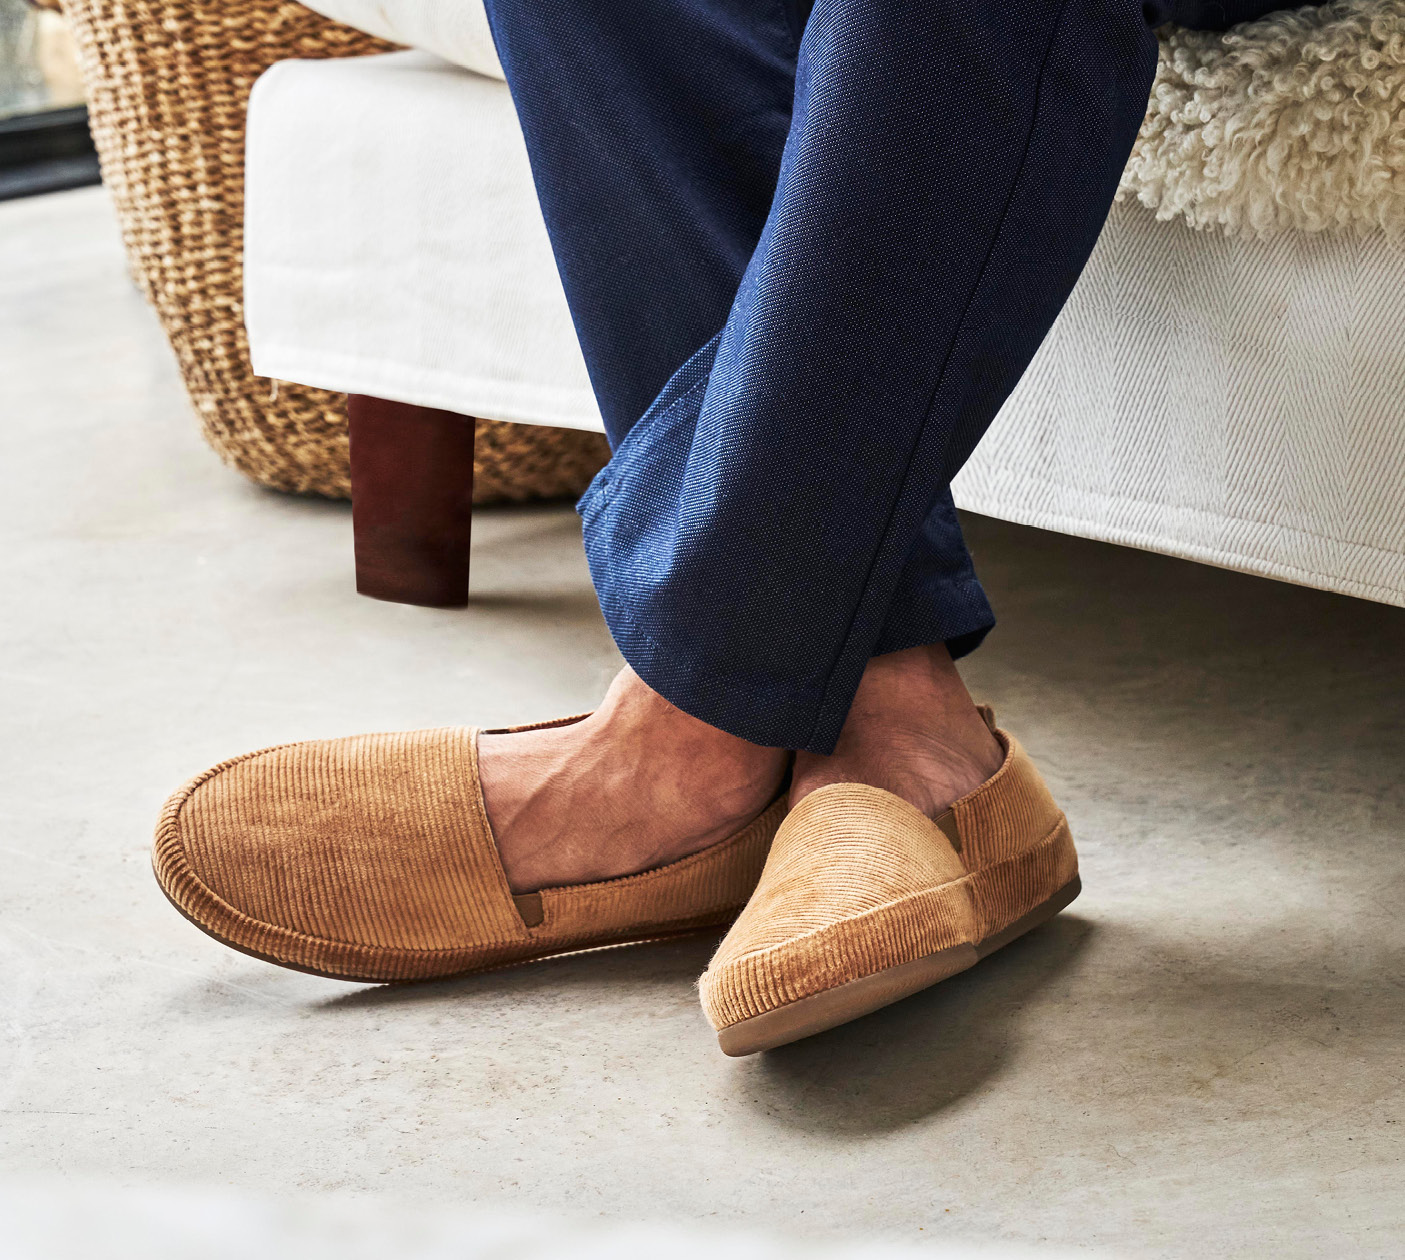 Sneakers, Loafers, And Casual Shoes For Men That Add Style To Your Downtime